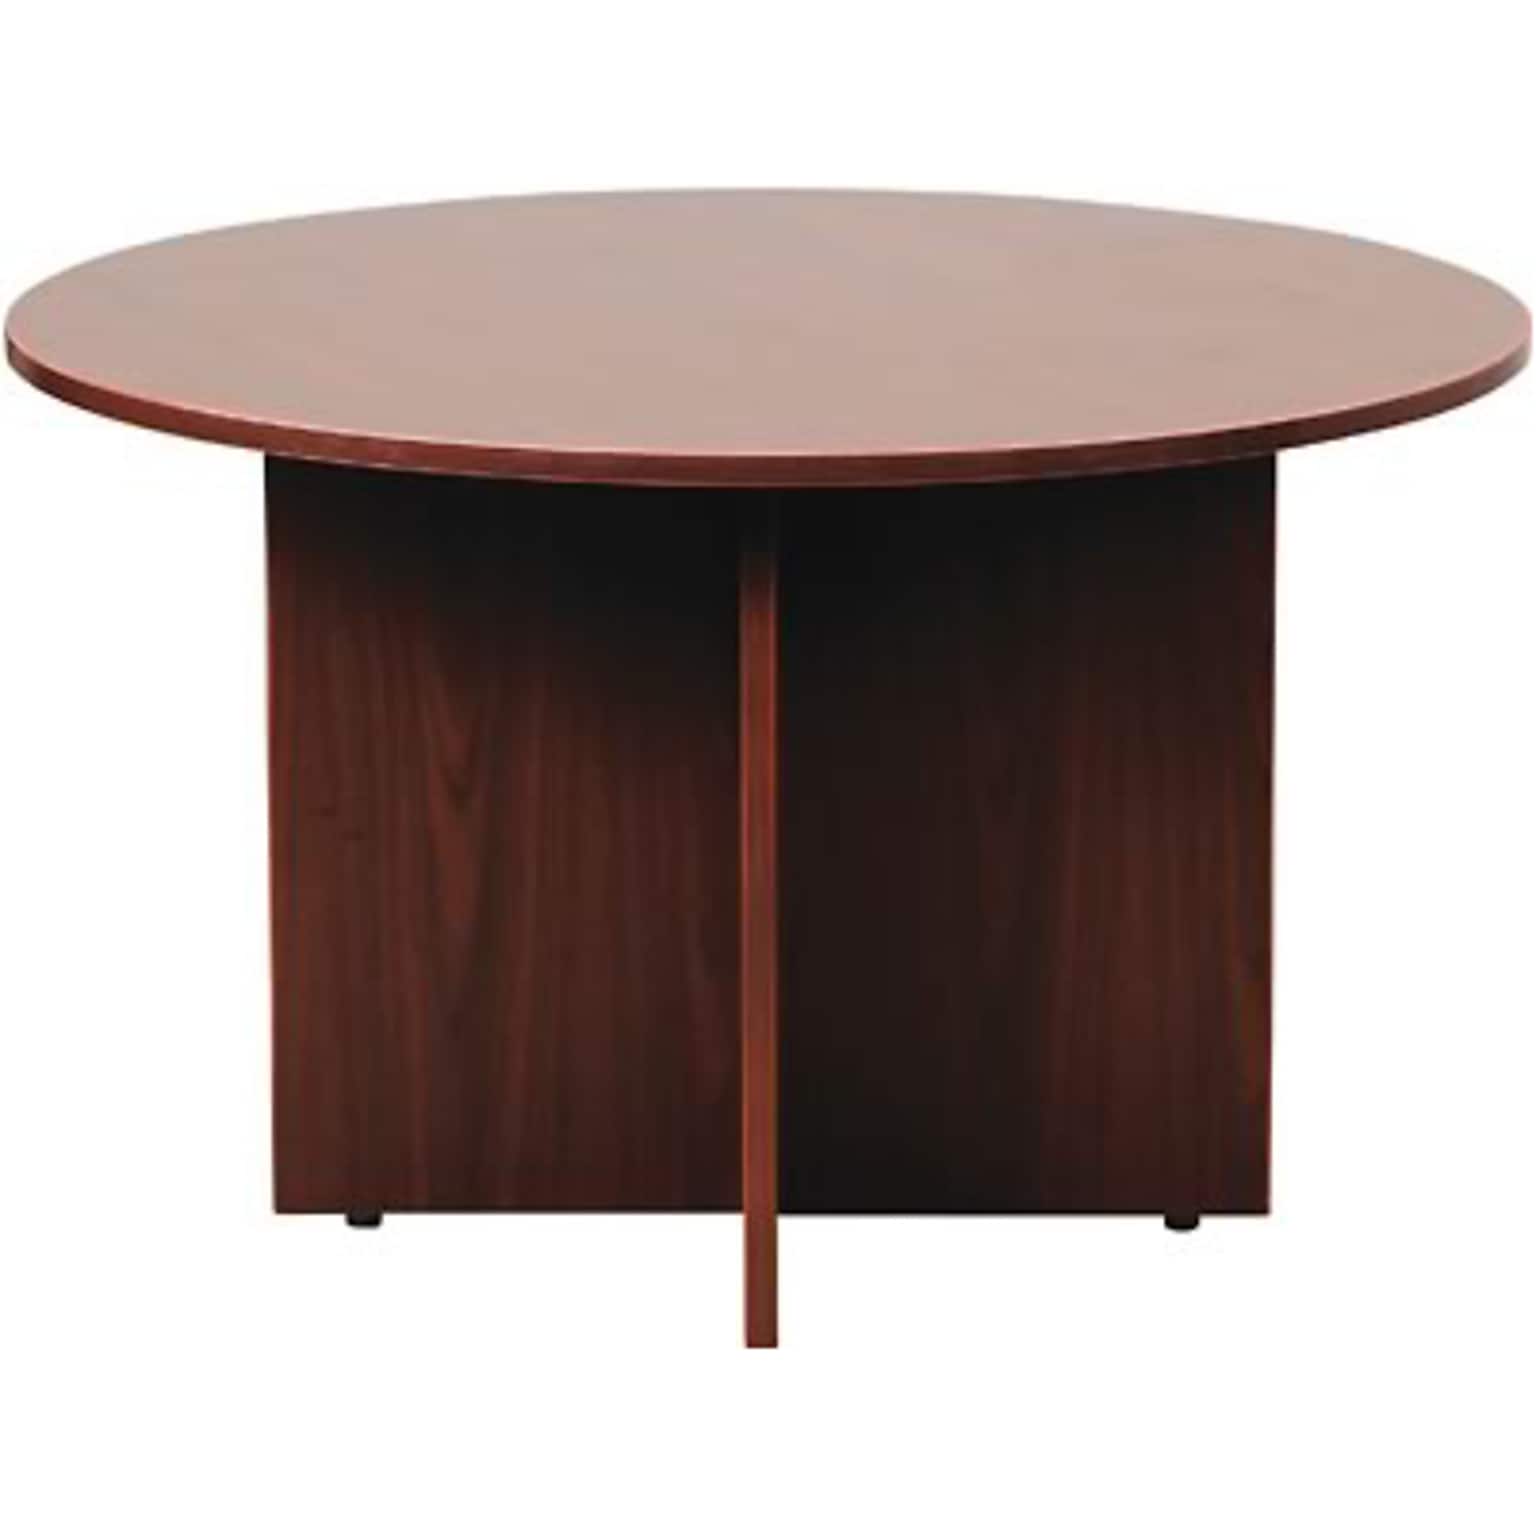 Boss® Laminate Collection in Mahogany Finish; 47 Round Table